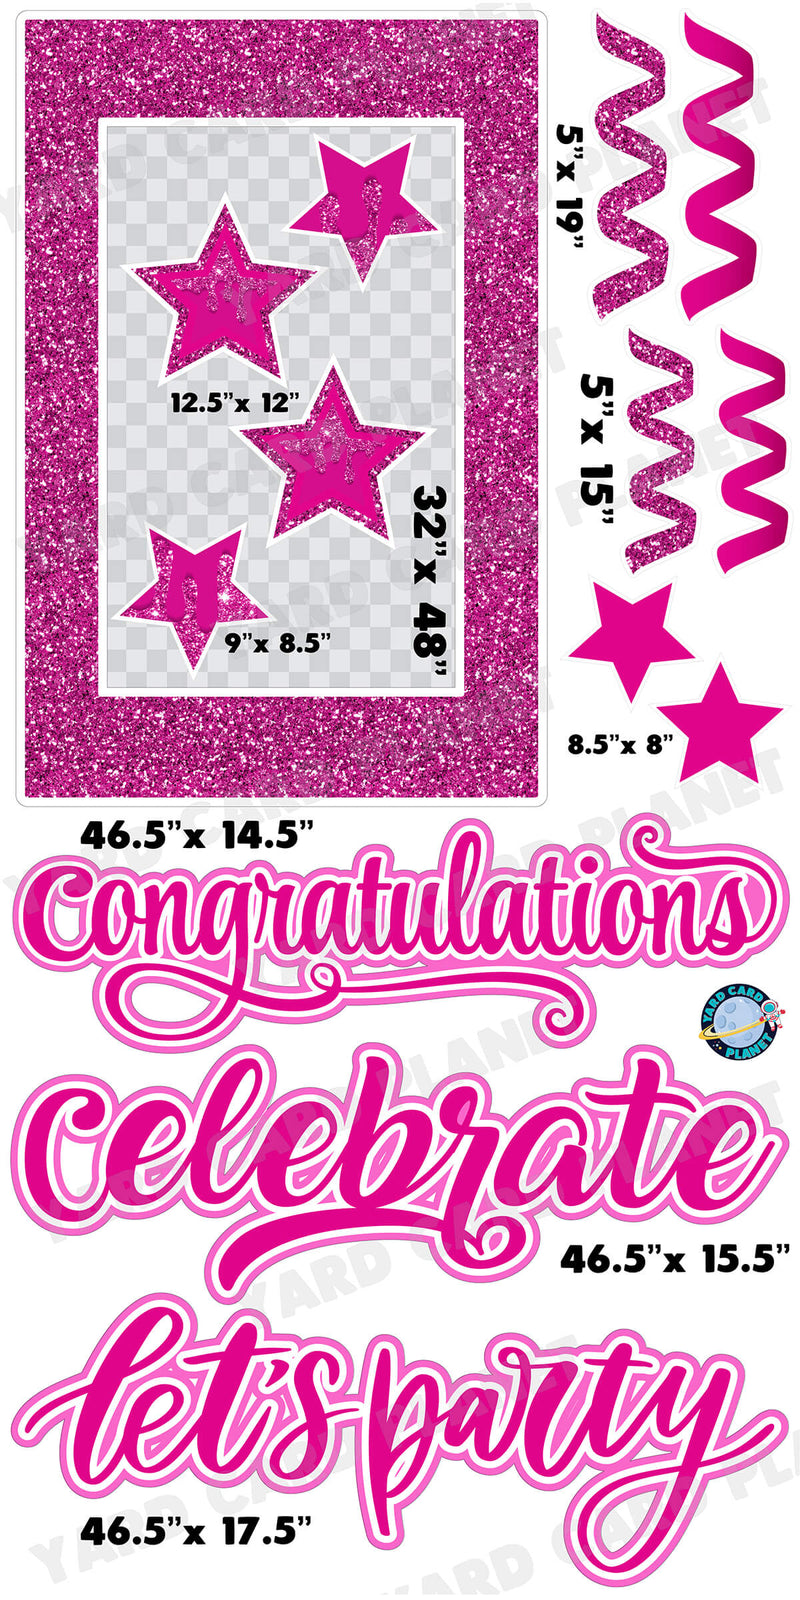 Hot Pink Glitter Multi Purpose EZ Frame with Interchangeable Greetings and Matching Yard Card Flair Set